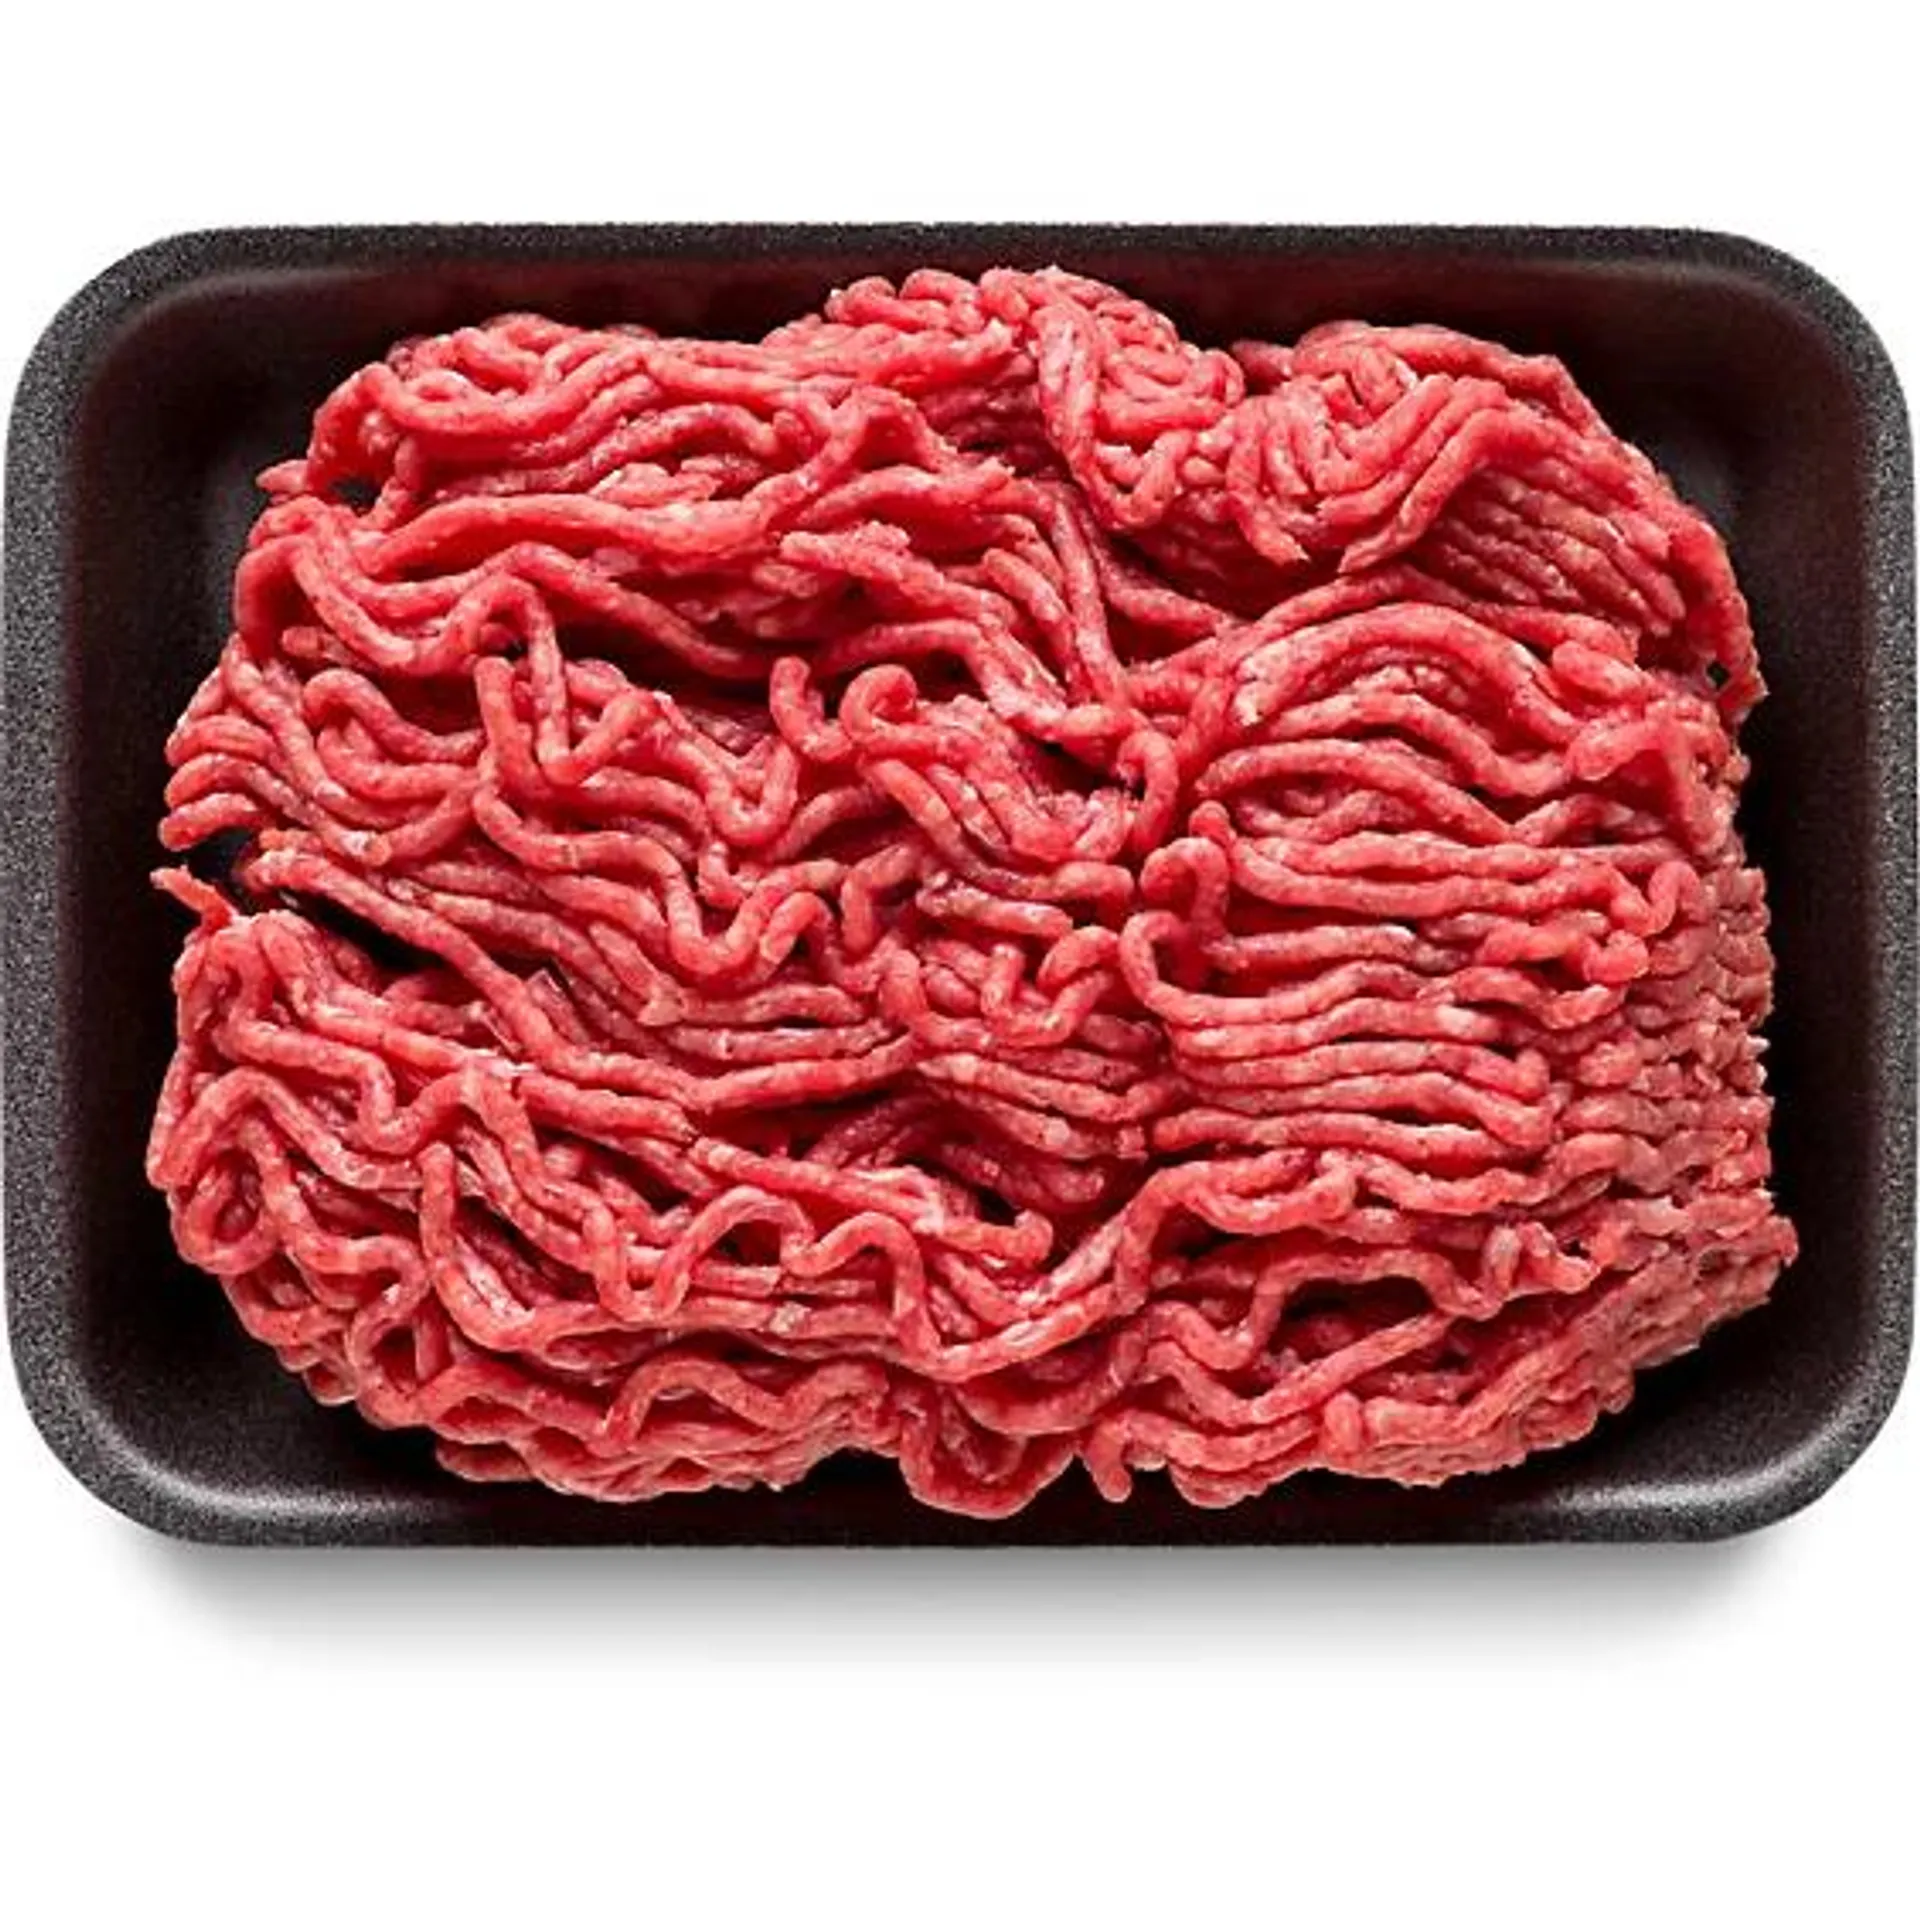 Signature SELECT 80% Lean 20% Fat Ground Beef - 1.35 Lb